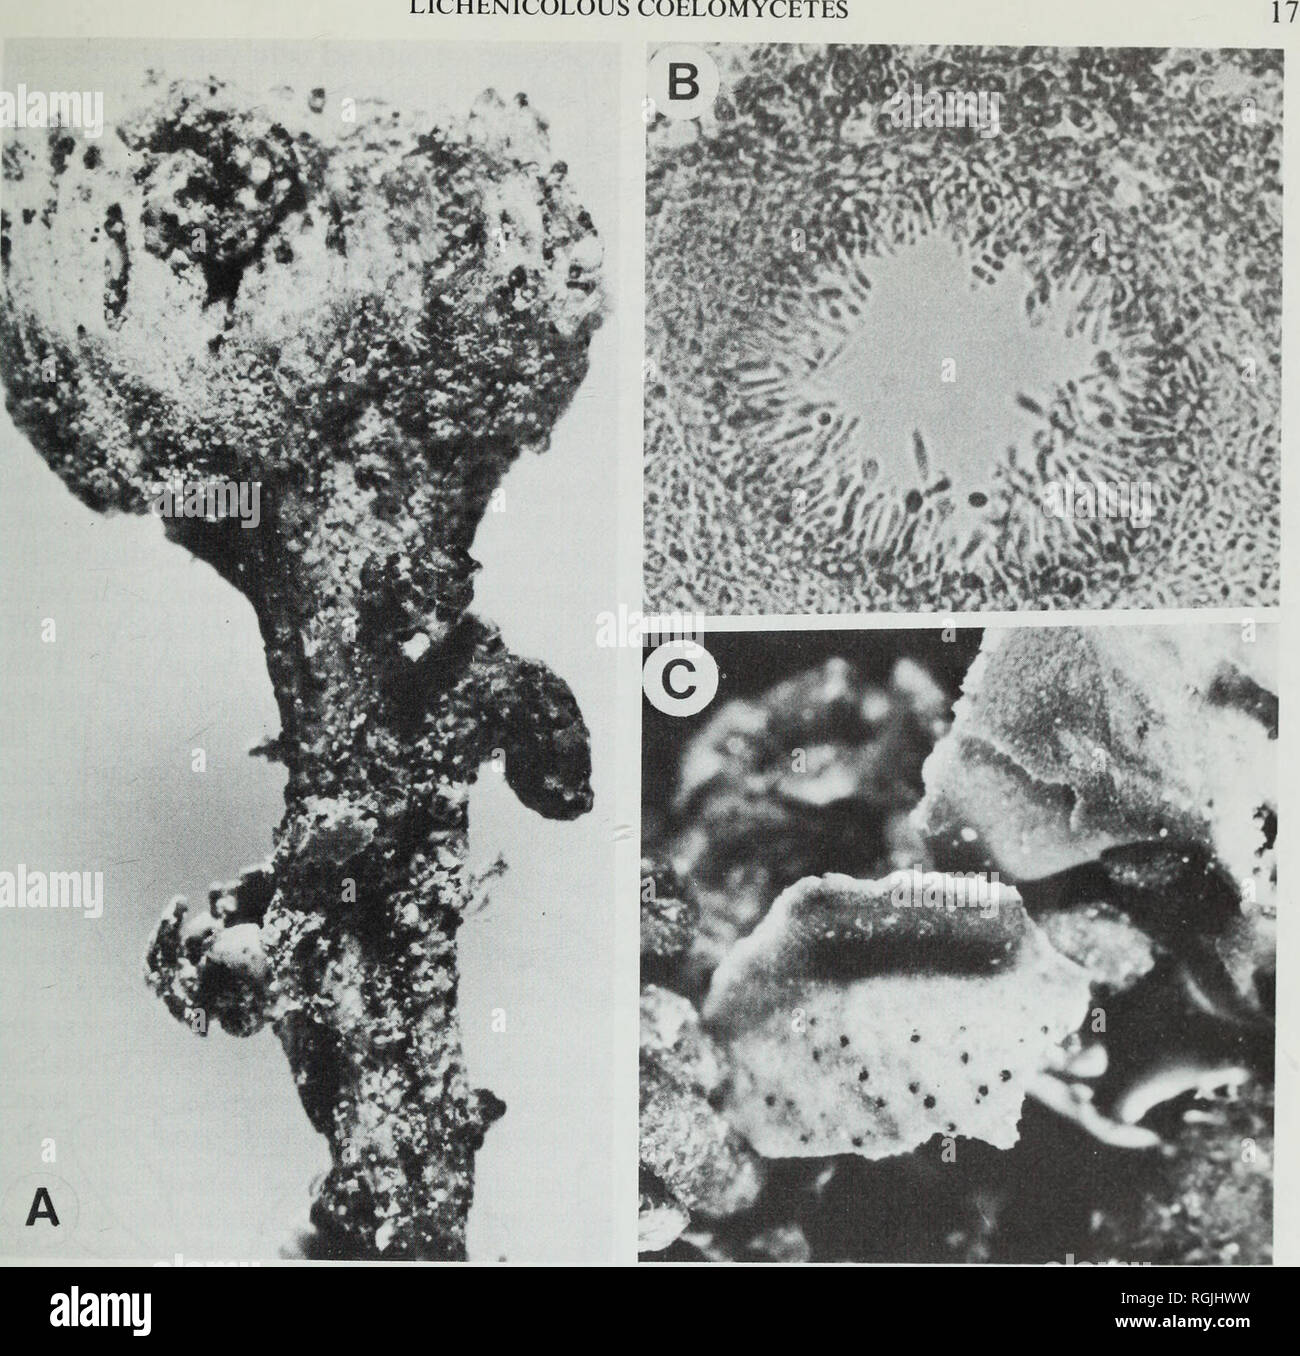 . Bulletin of the British Museum (Natural History). Botany; Botany. LICHENICOLOUS COELOMYCETES. Fig. 5A-B, Epicladonia sandstedei (IMI 240228); A, infected podetium with galls (x 125); B, vertical section of pycnidium (x 500). C, E. stenospora (Dobbeler 1827), infected squamule showing decolorization and pycnidia (x 20). appearing almost cellular in parts. Conidiophores absent or short-cylindrical, simple or sparsely branched at the base, hyaline, variable in length, to 25 jum tall, 3^//m wide. Conidiogenous cells holoblastic, arising directly from the pycnidial wall or integrated into the con Stock Photo